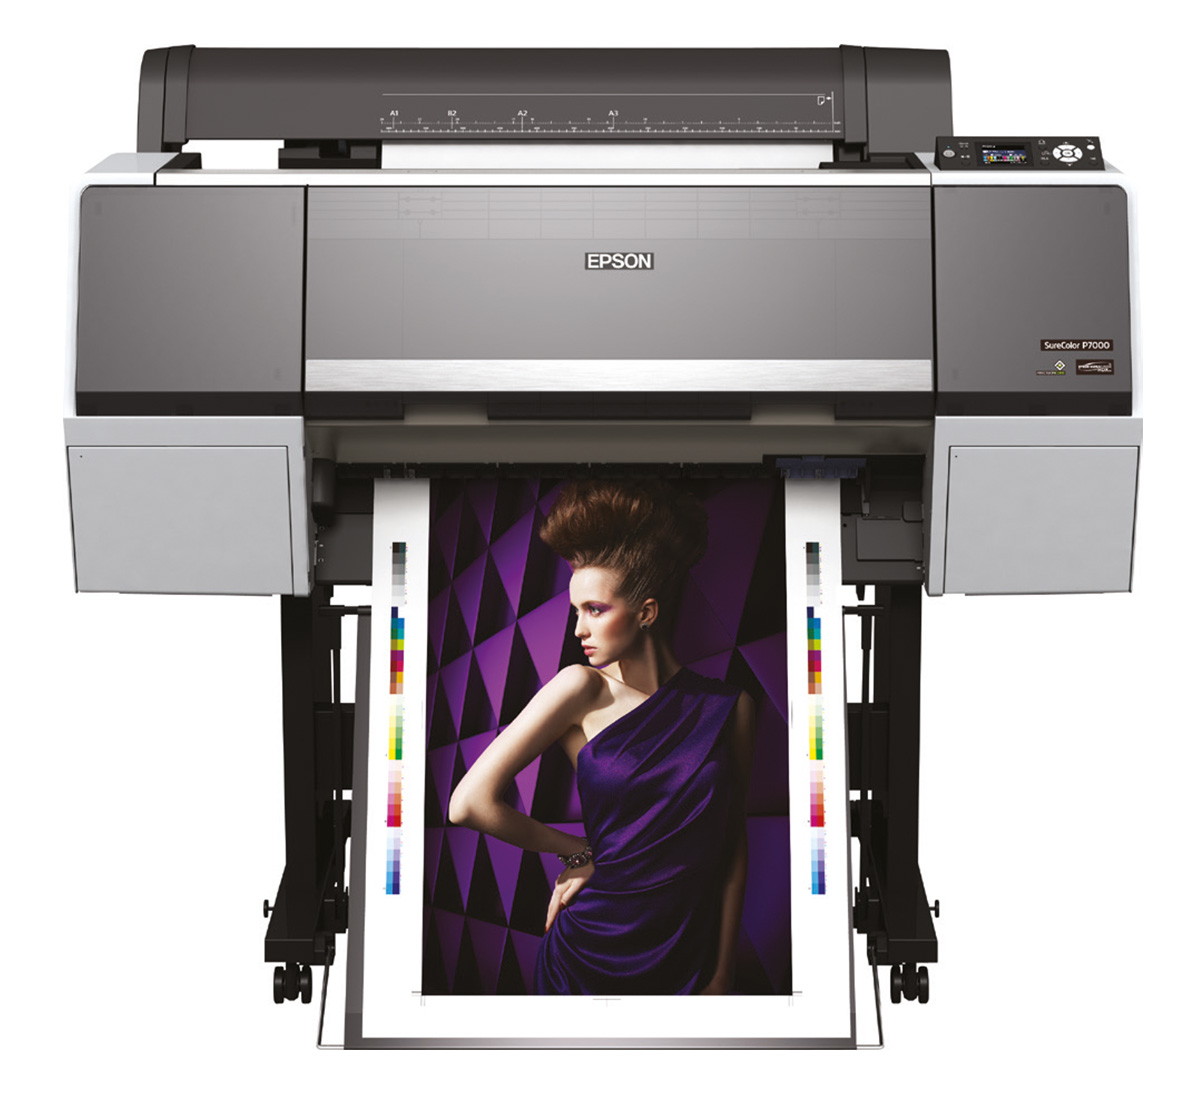 Introducing the Epson P7000